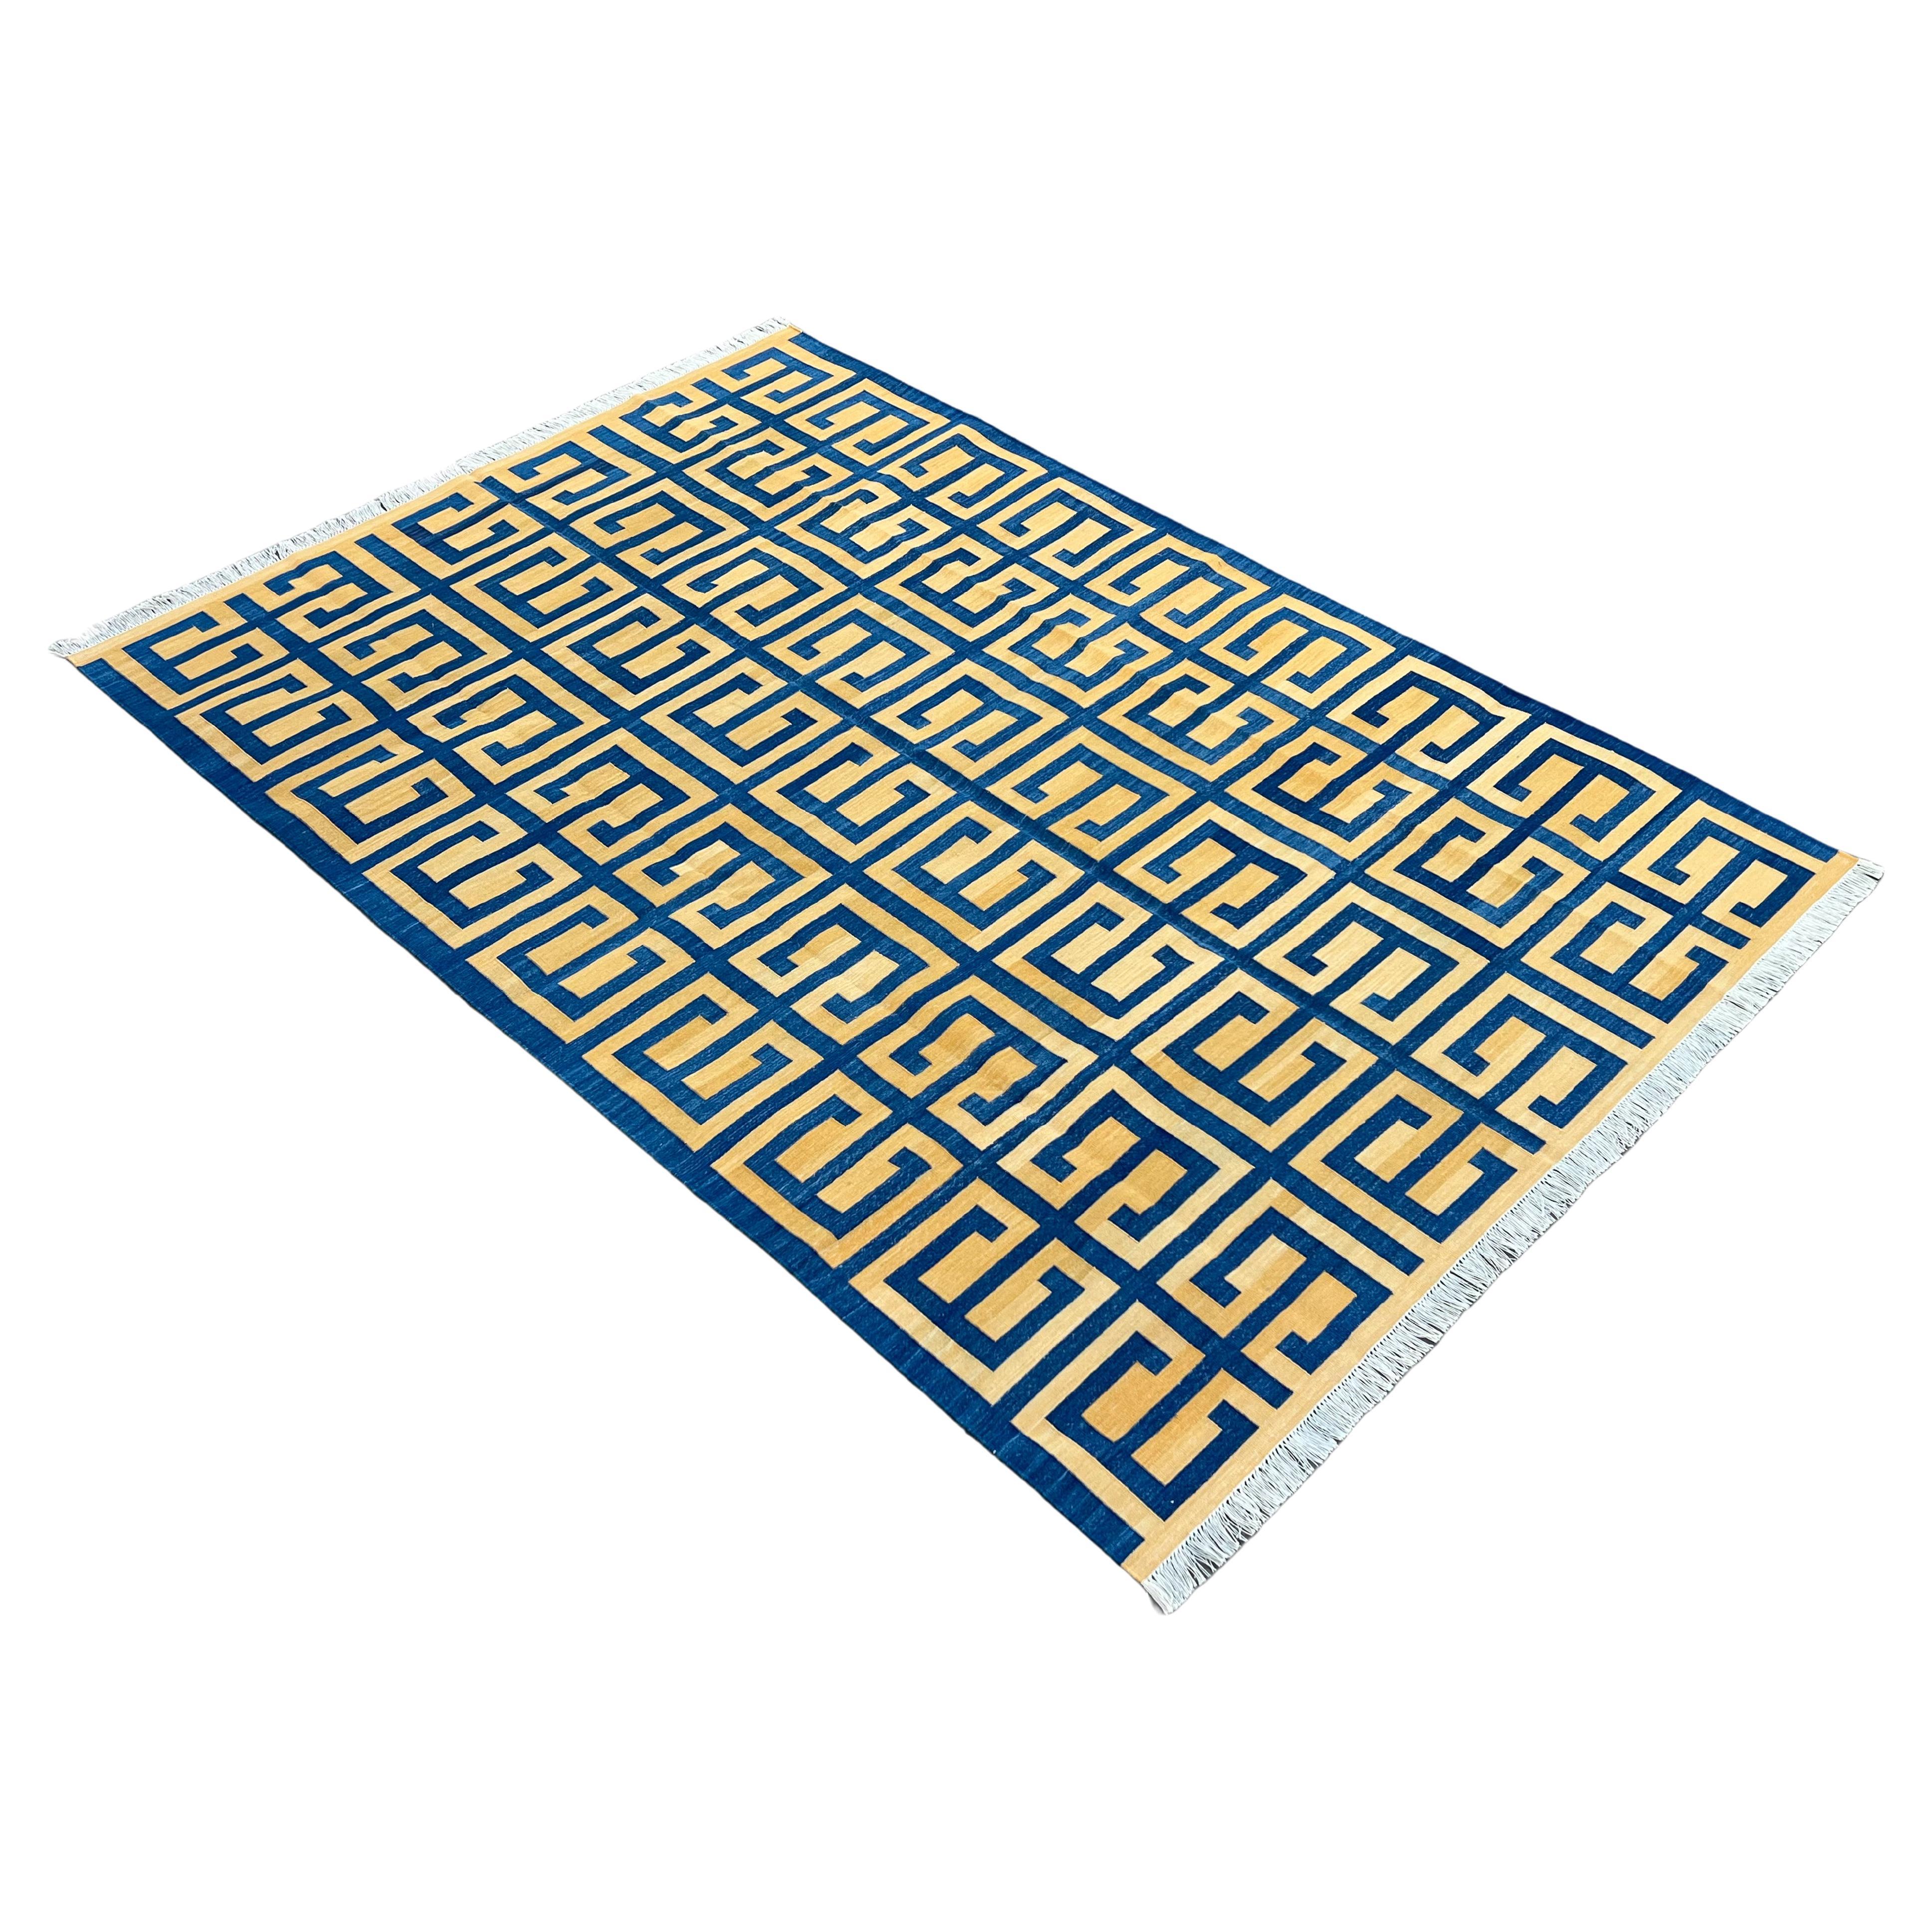 Handmade Cotton Area Flat Weave Rug, Blue & Yellow Geometric Indian Dhurrie Rug For Sale